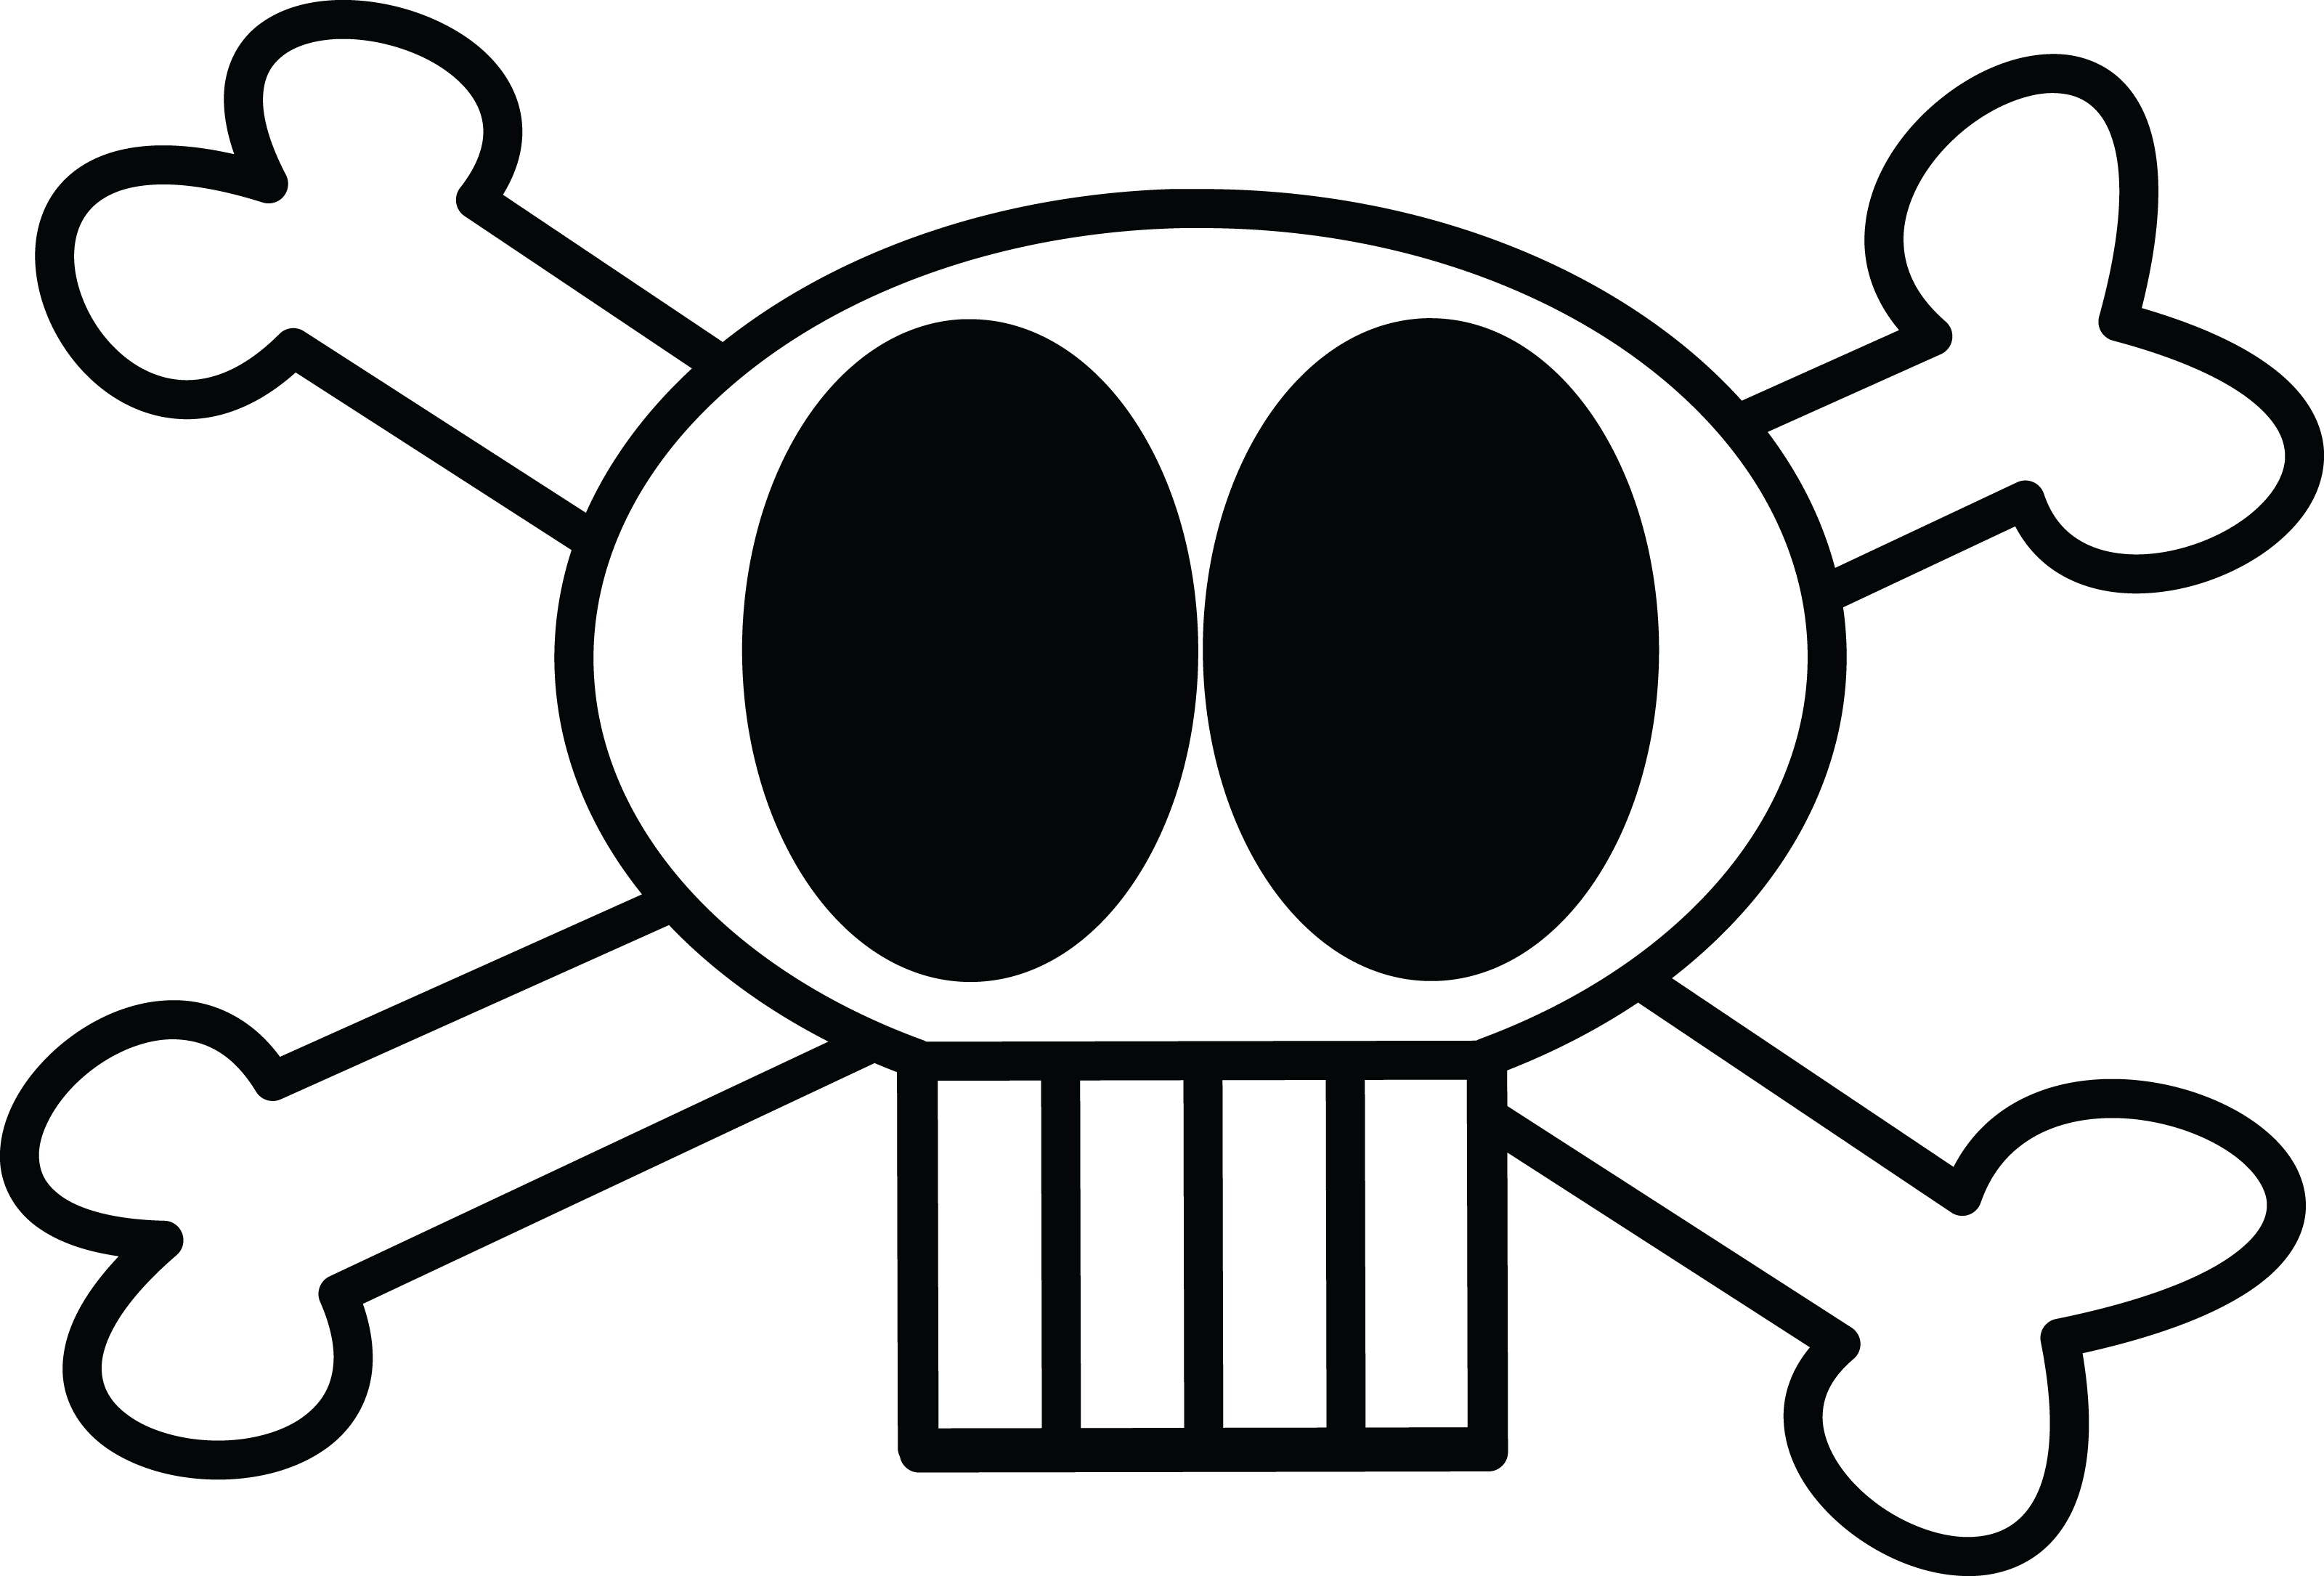 Free Clipart Illustration Of Skull And Crossbones by 000197